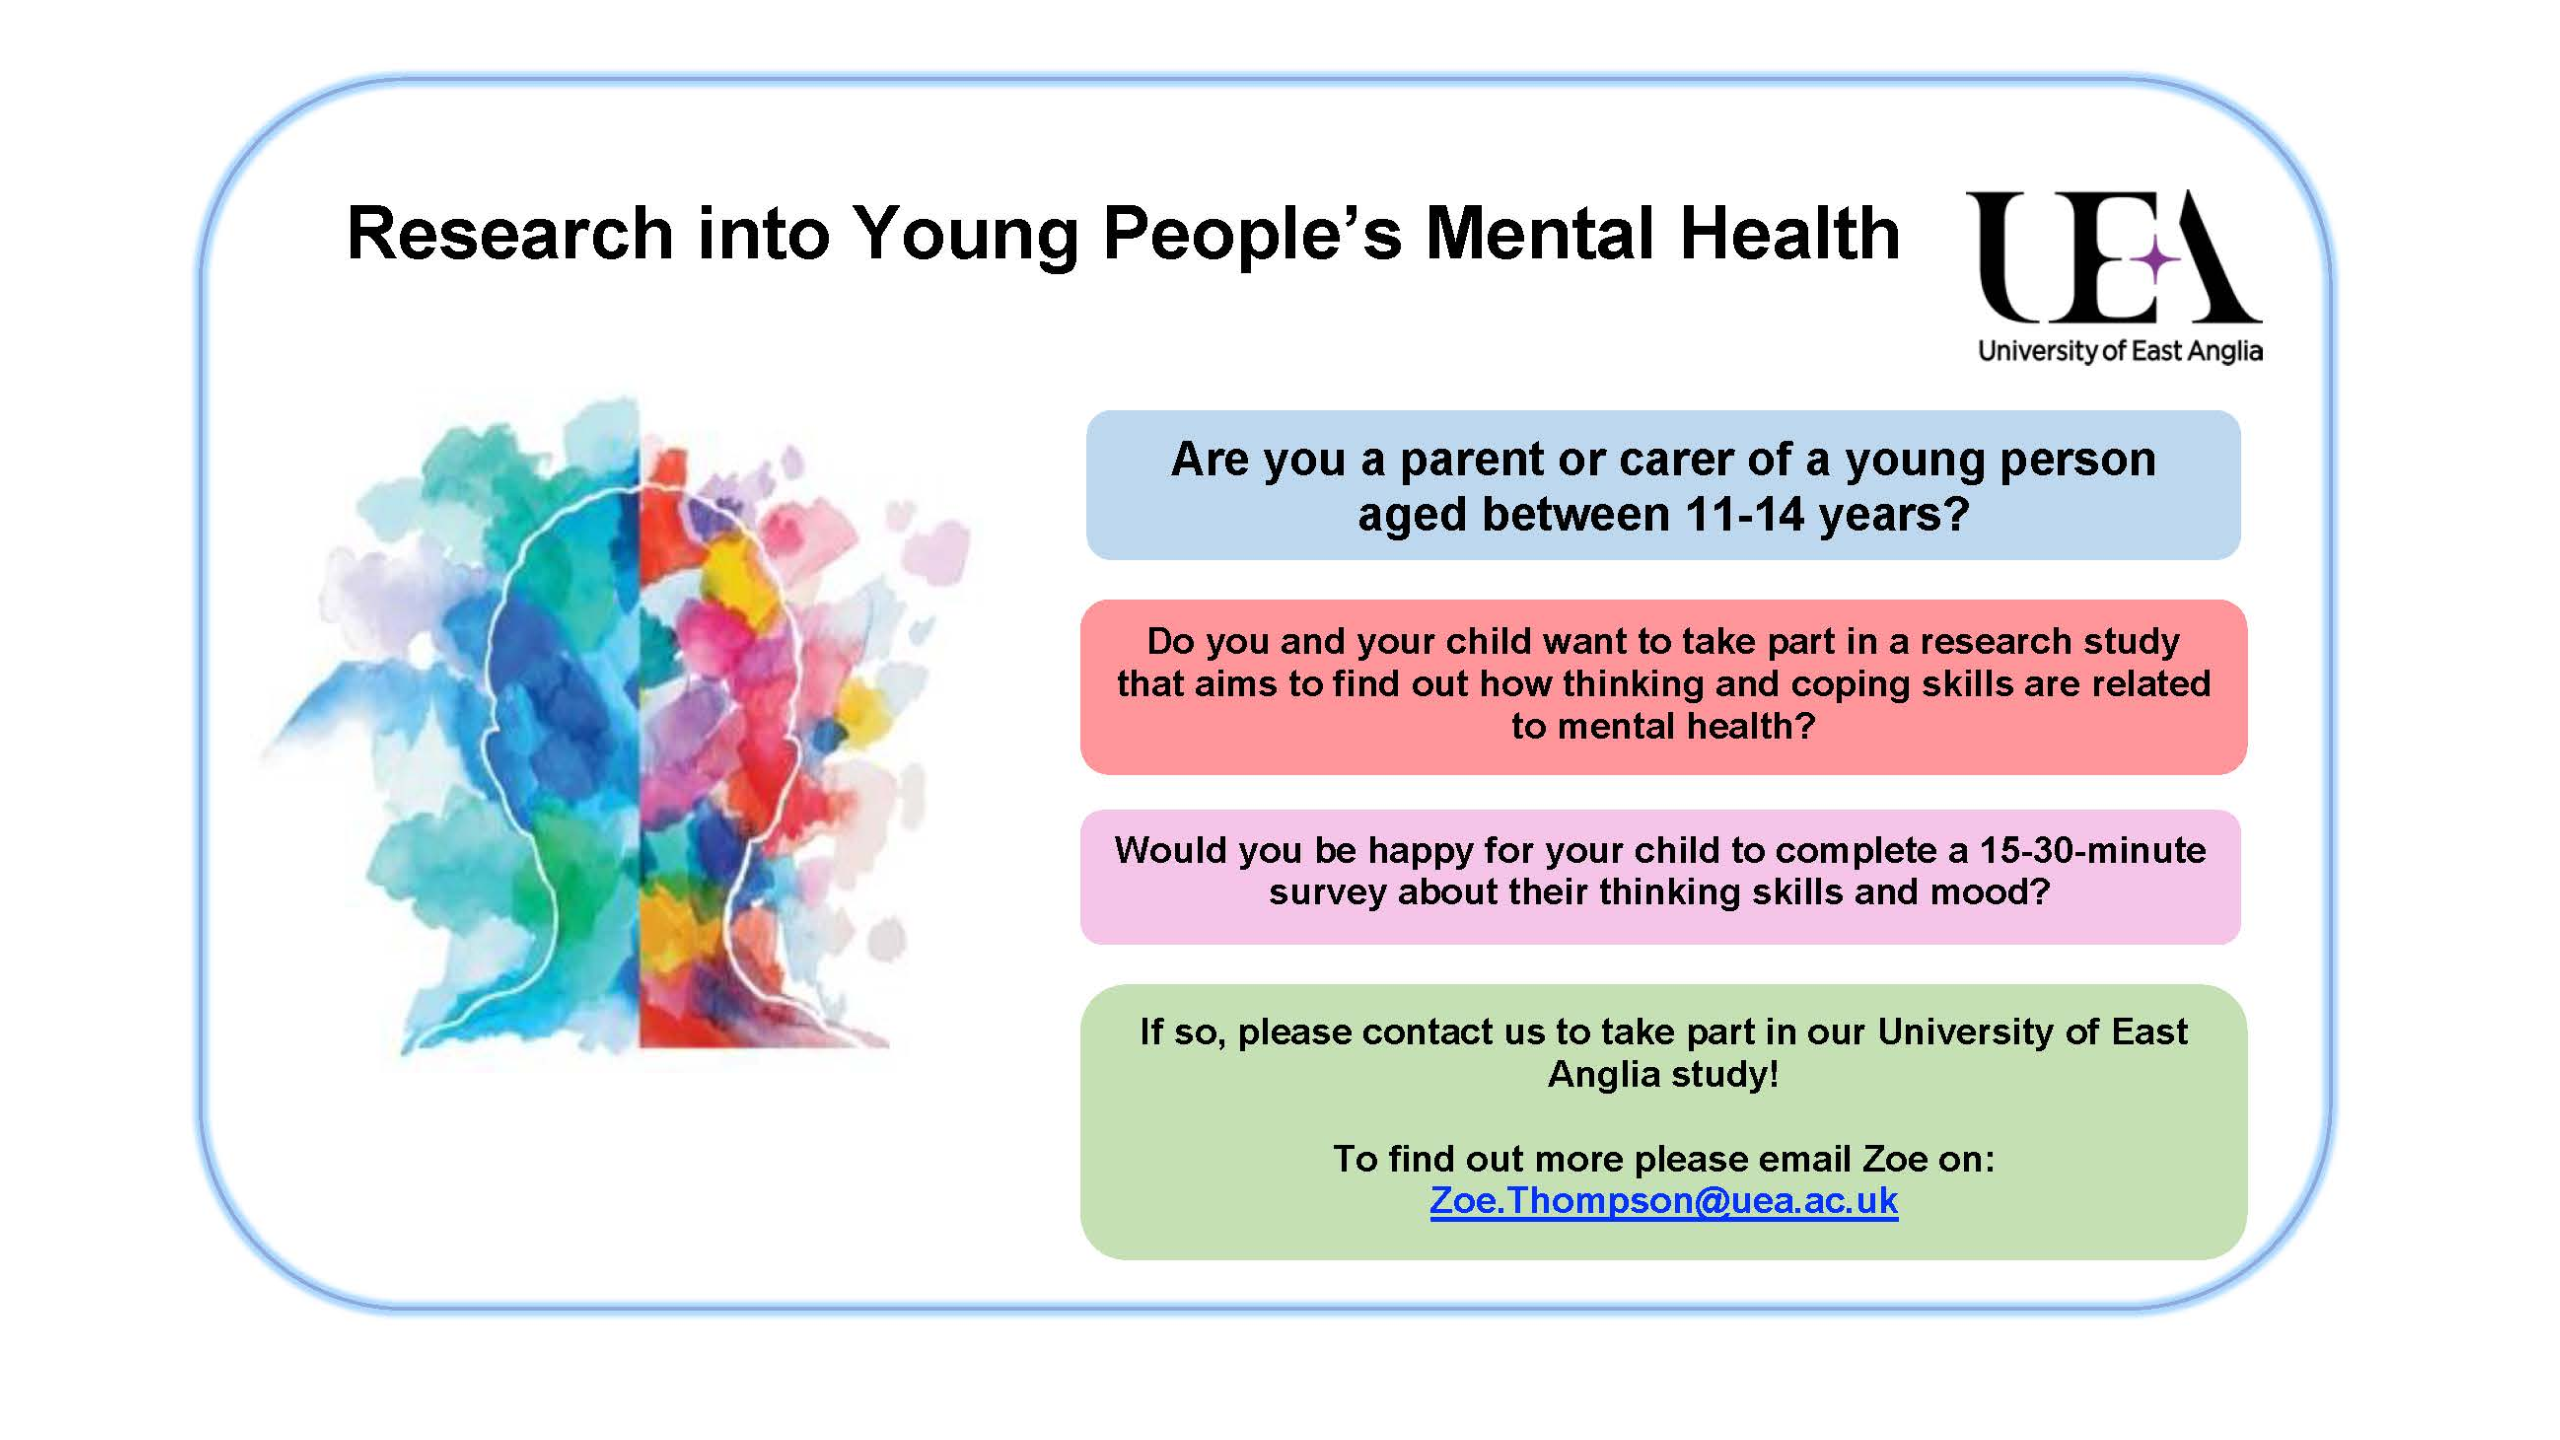 Research into Young People’s Mental Health